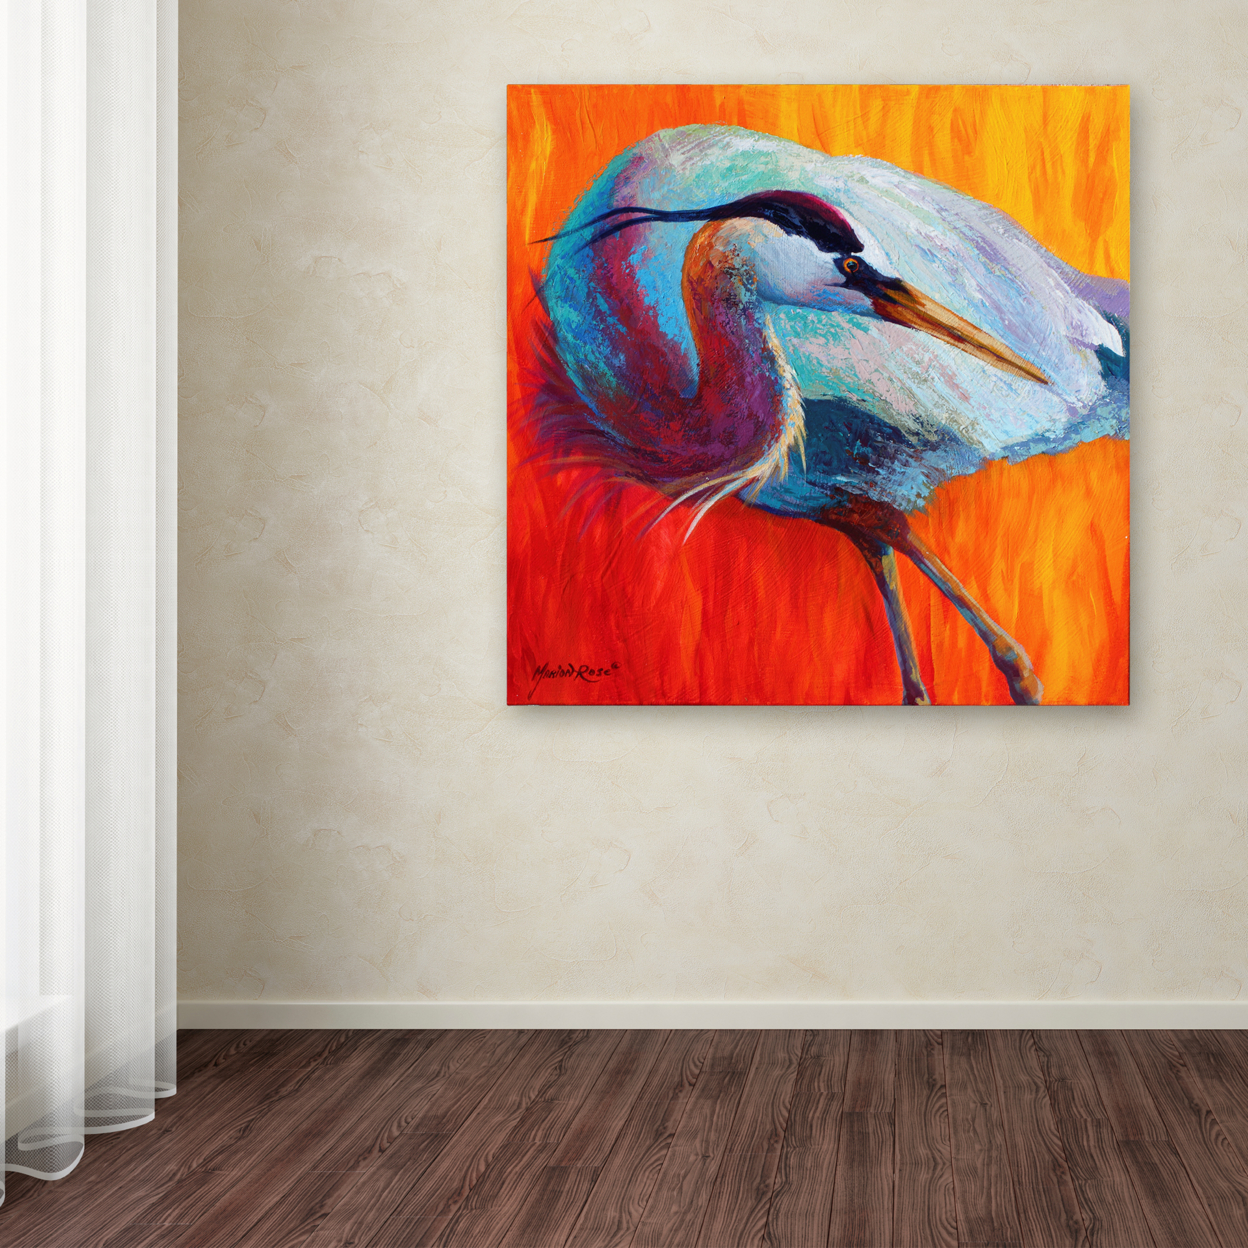 Marion Rose 'Glance Heron' Ready To Hang Canvas Art 24 X 24 Inches Made In USA